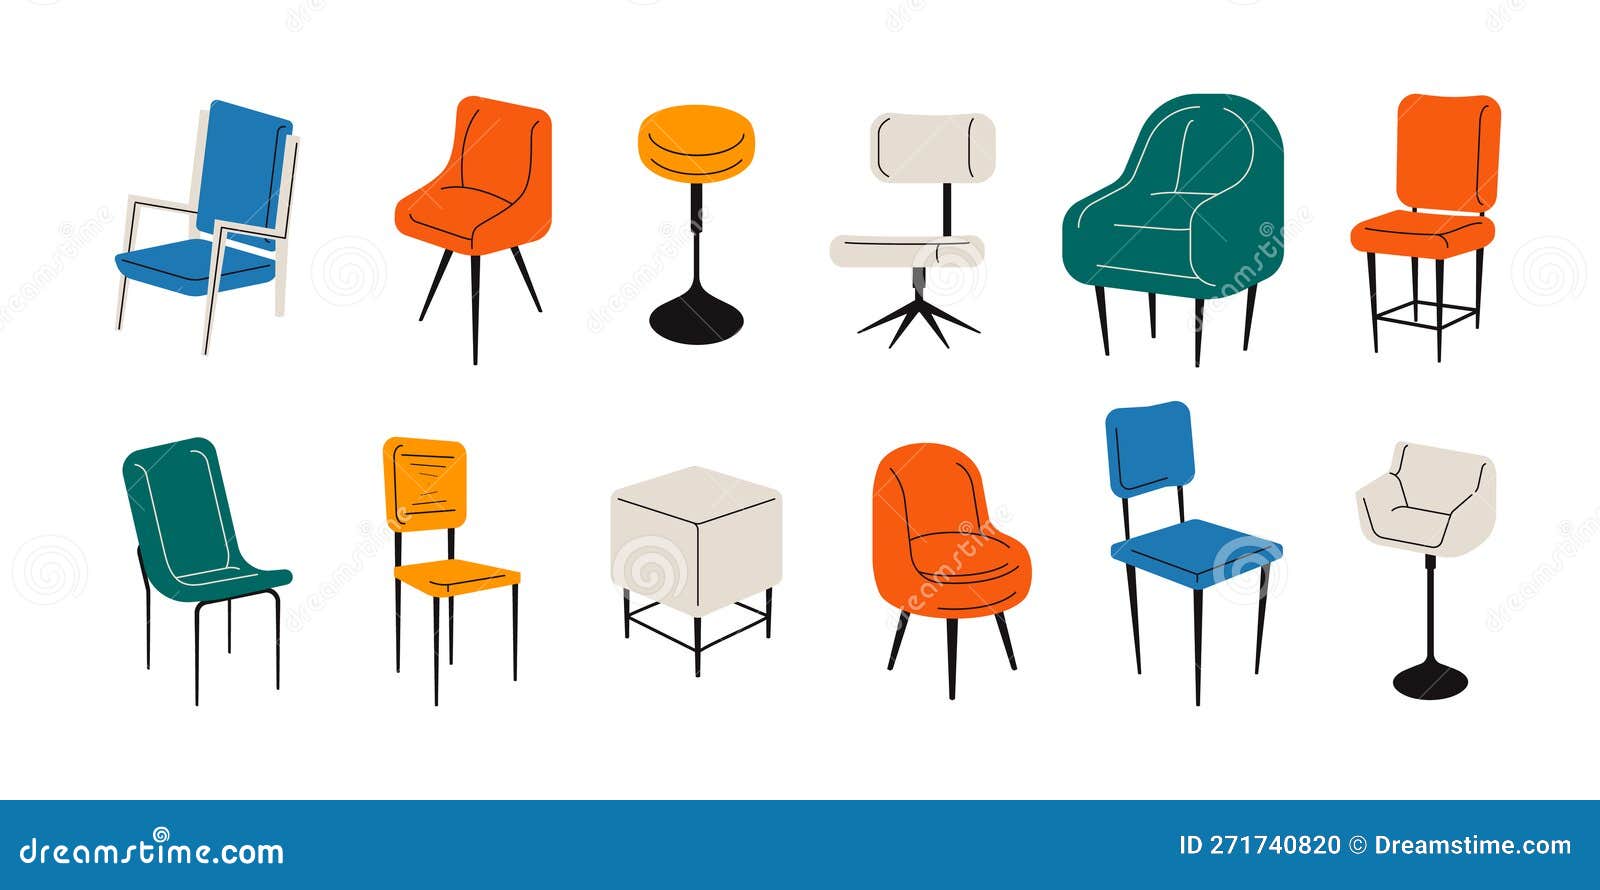 Chairs Collection. Modern Room Interior Furniture, Cartoon Stools ...